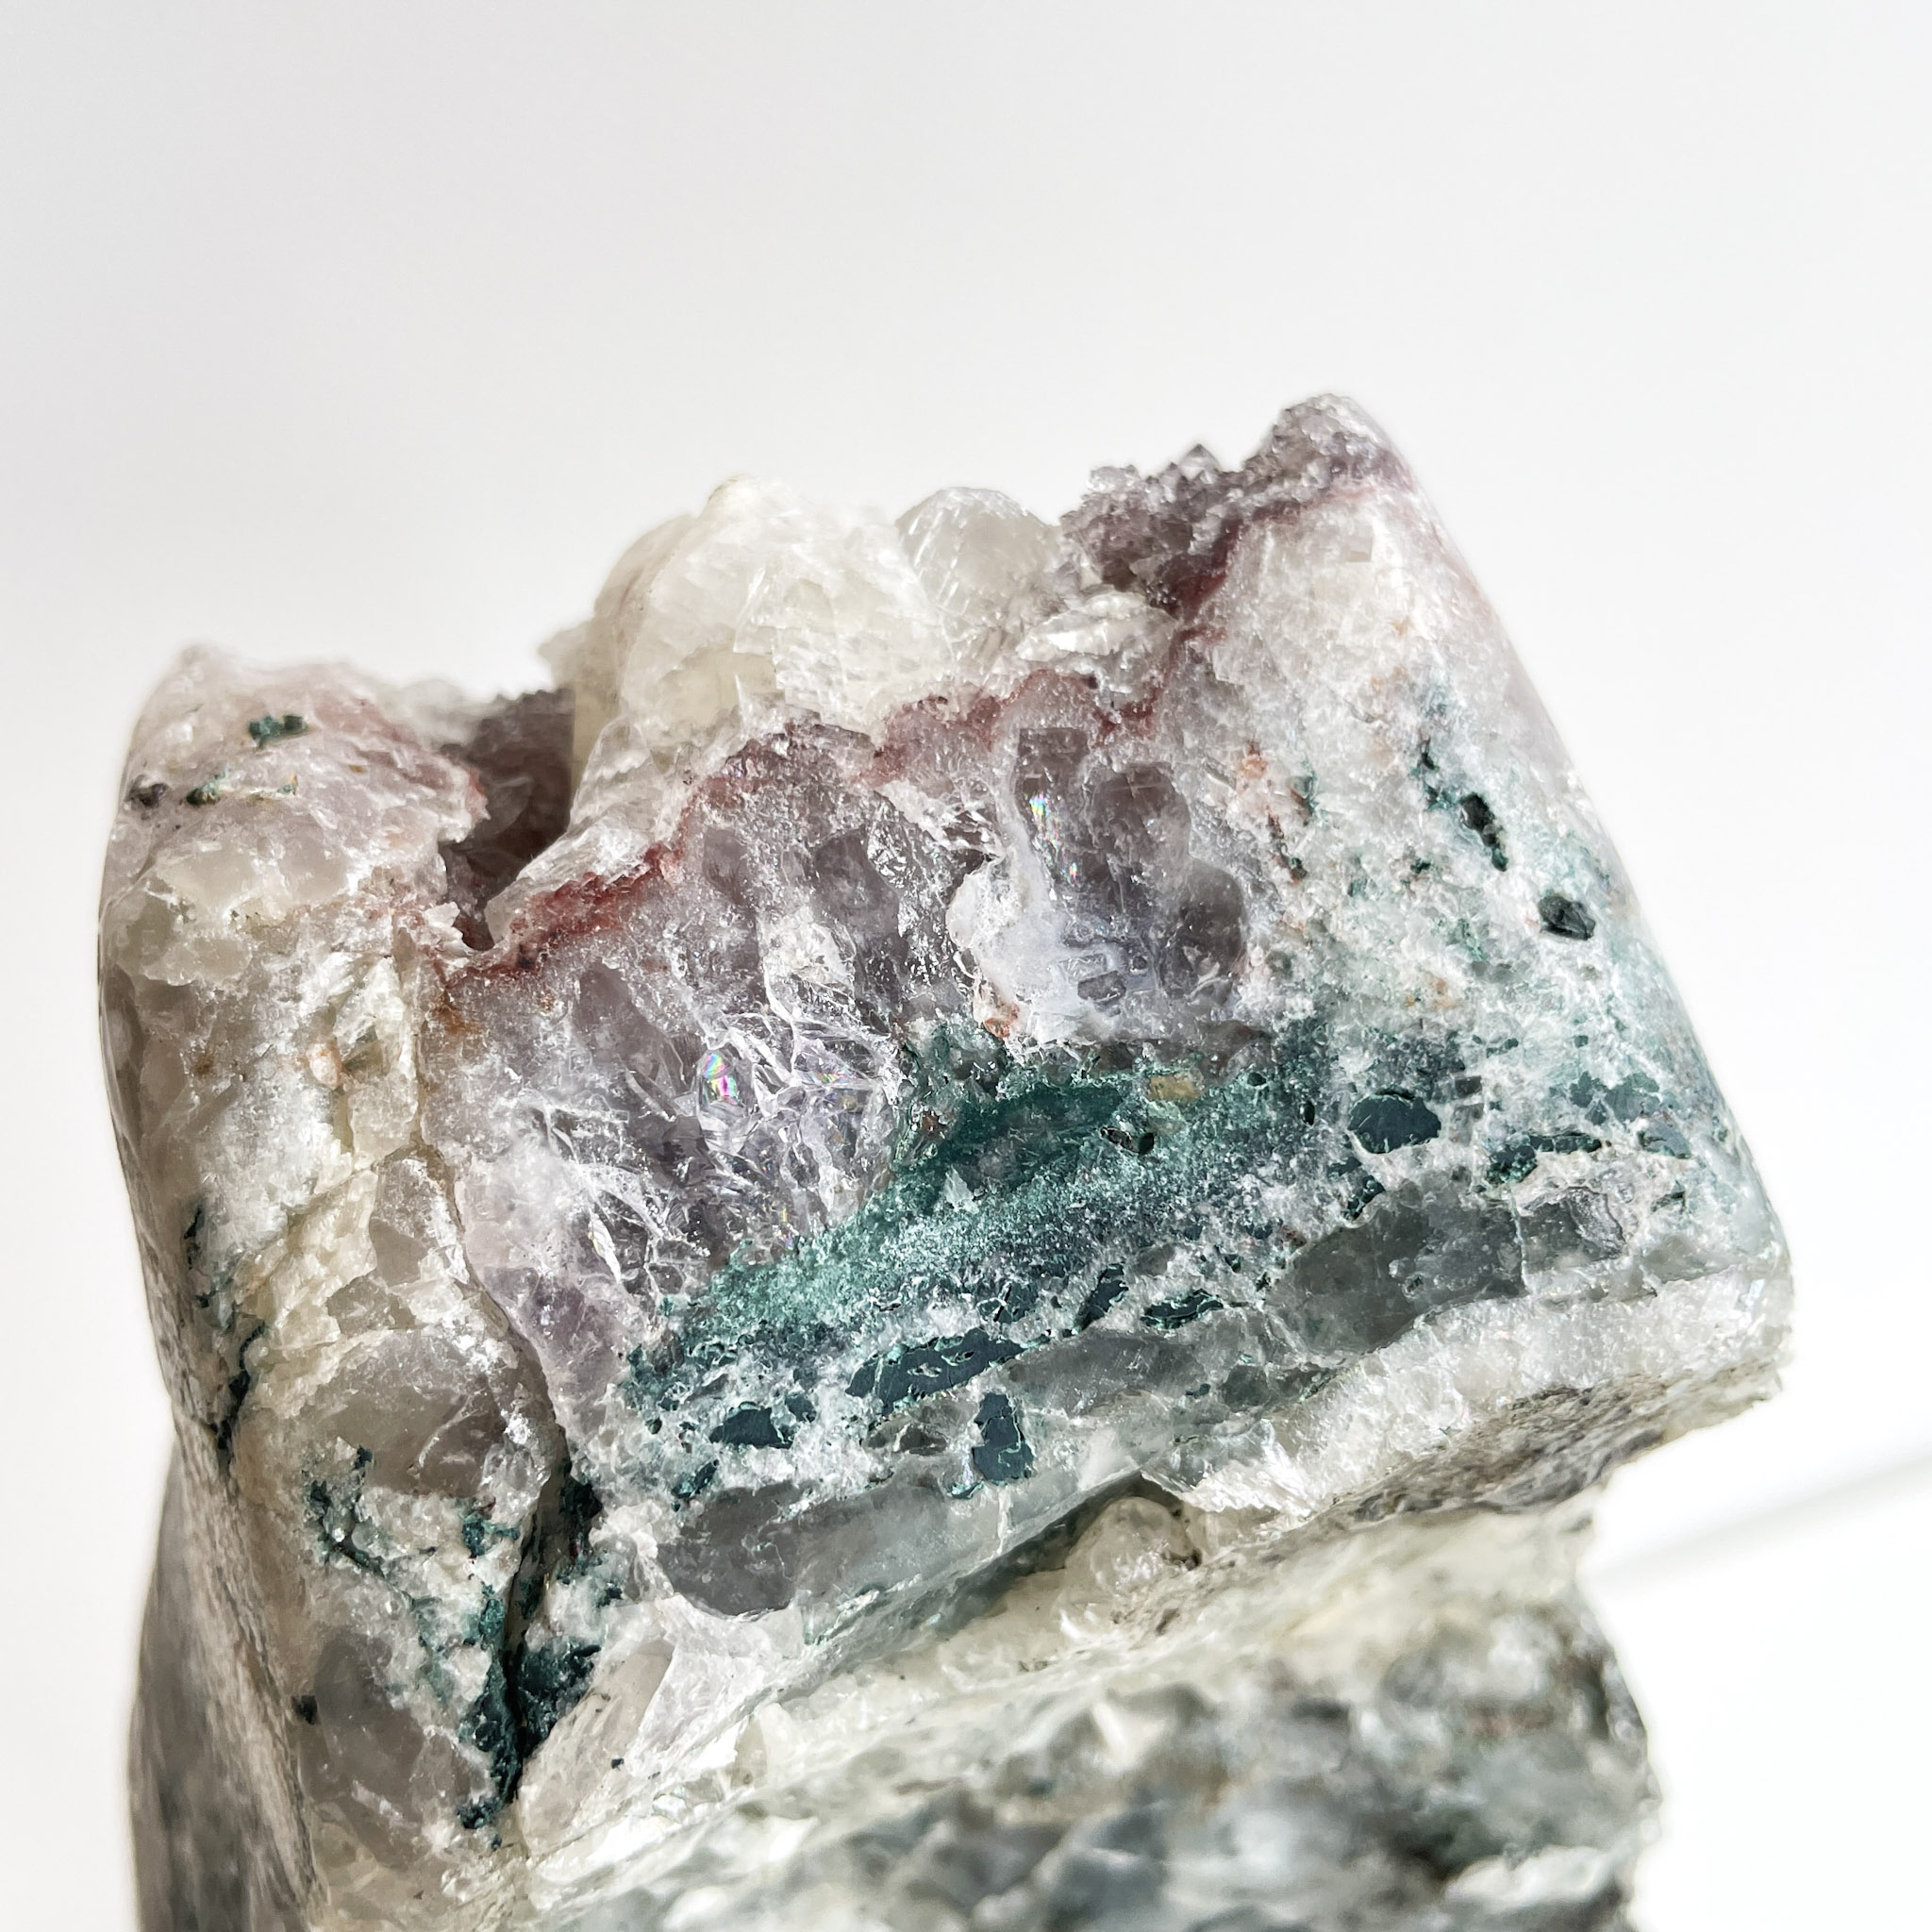 A close-up image of a rough mineral specimen with various translucent and opaque crystalline structures in shades of white, purple, and green.